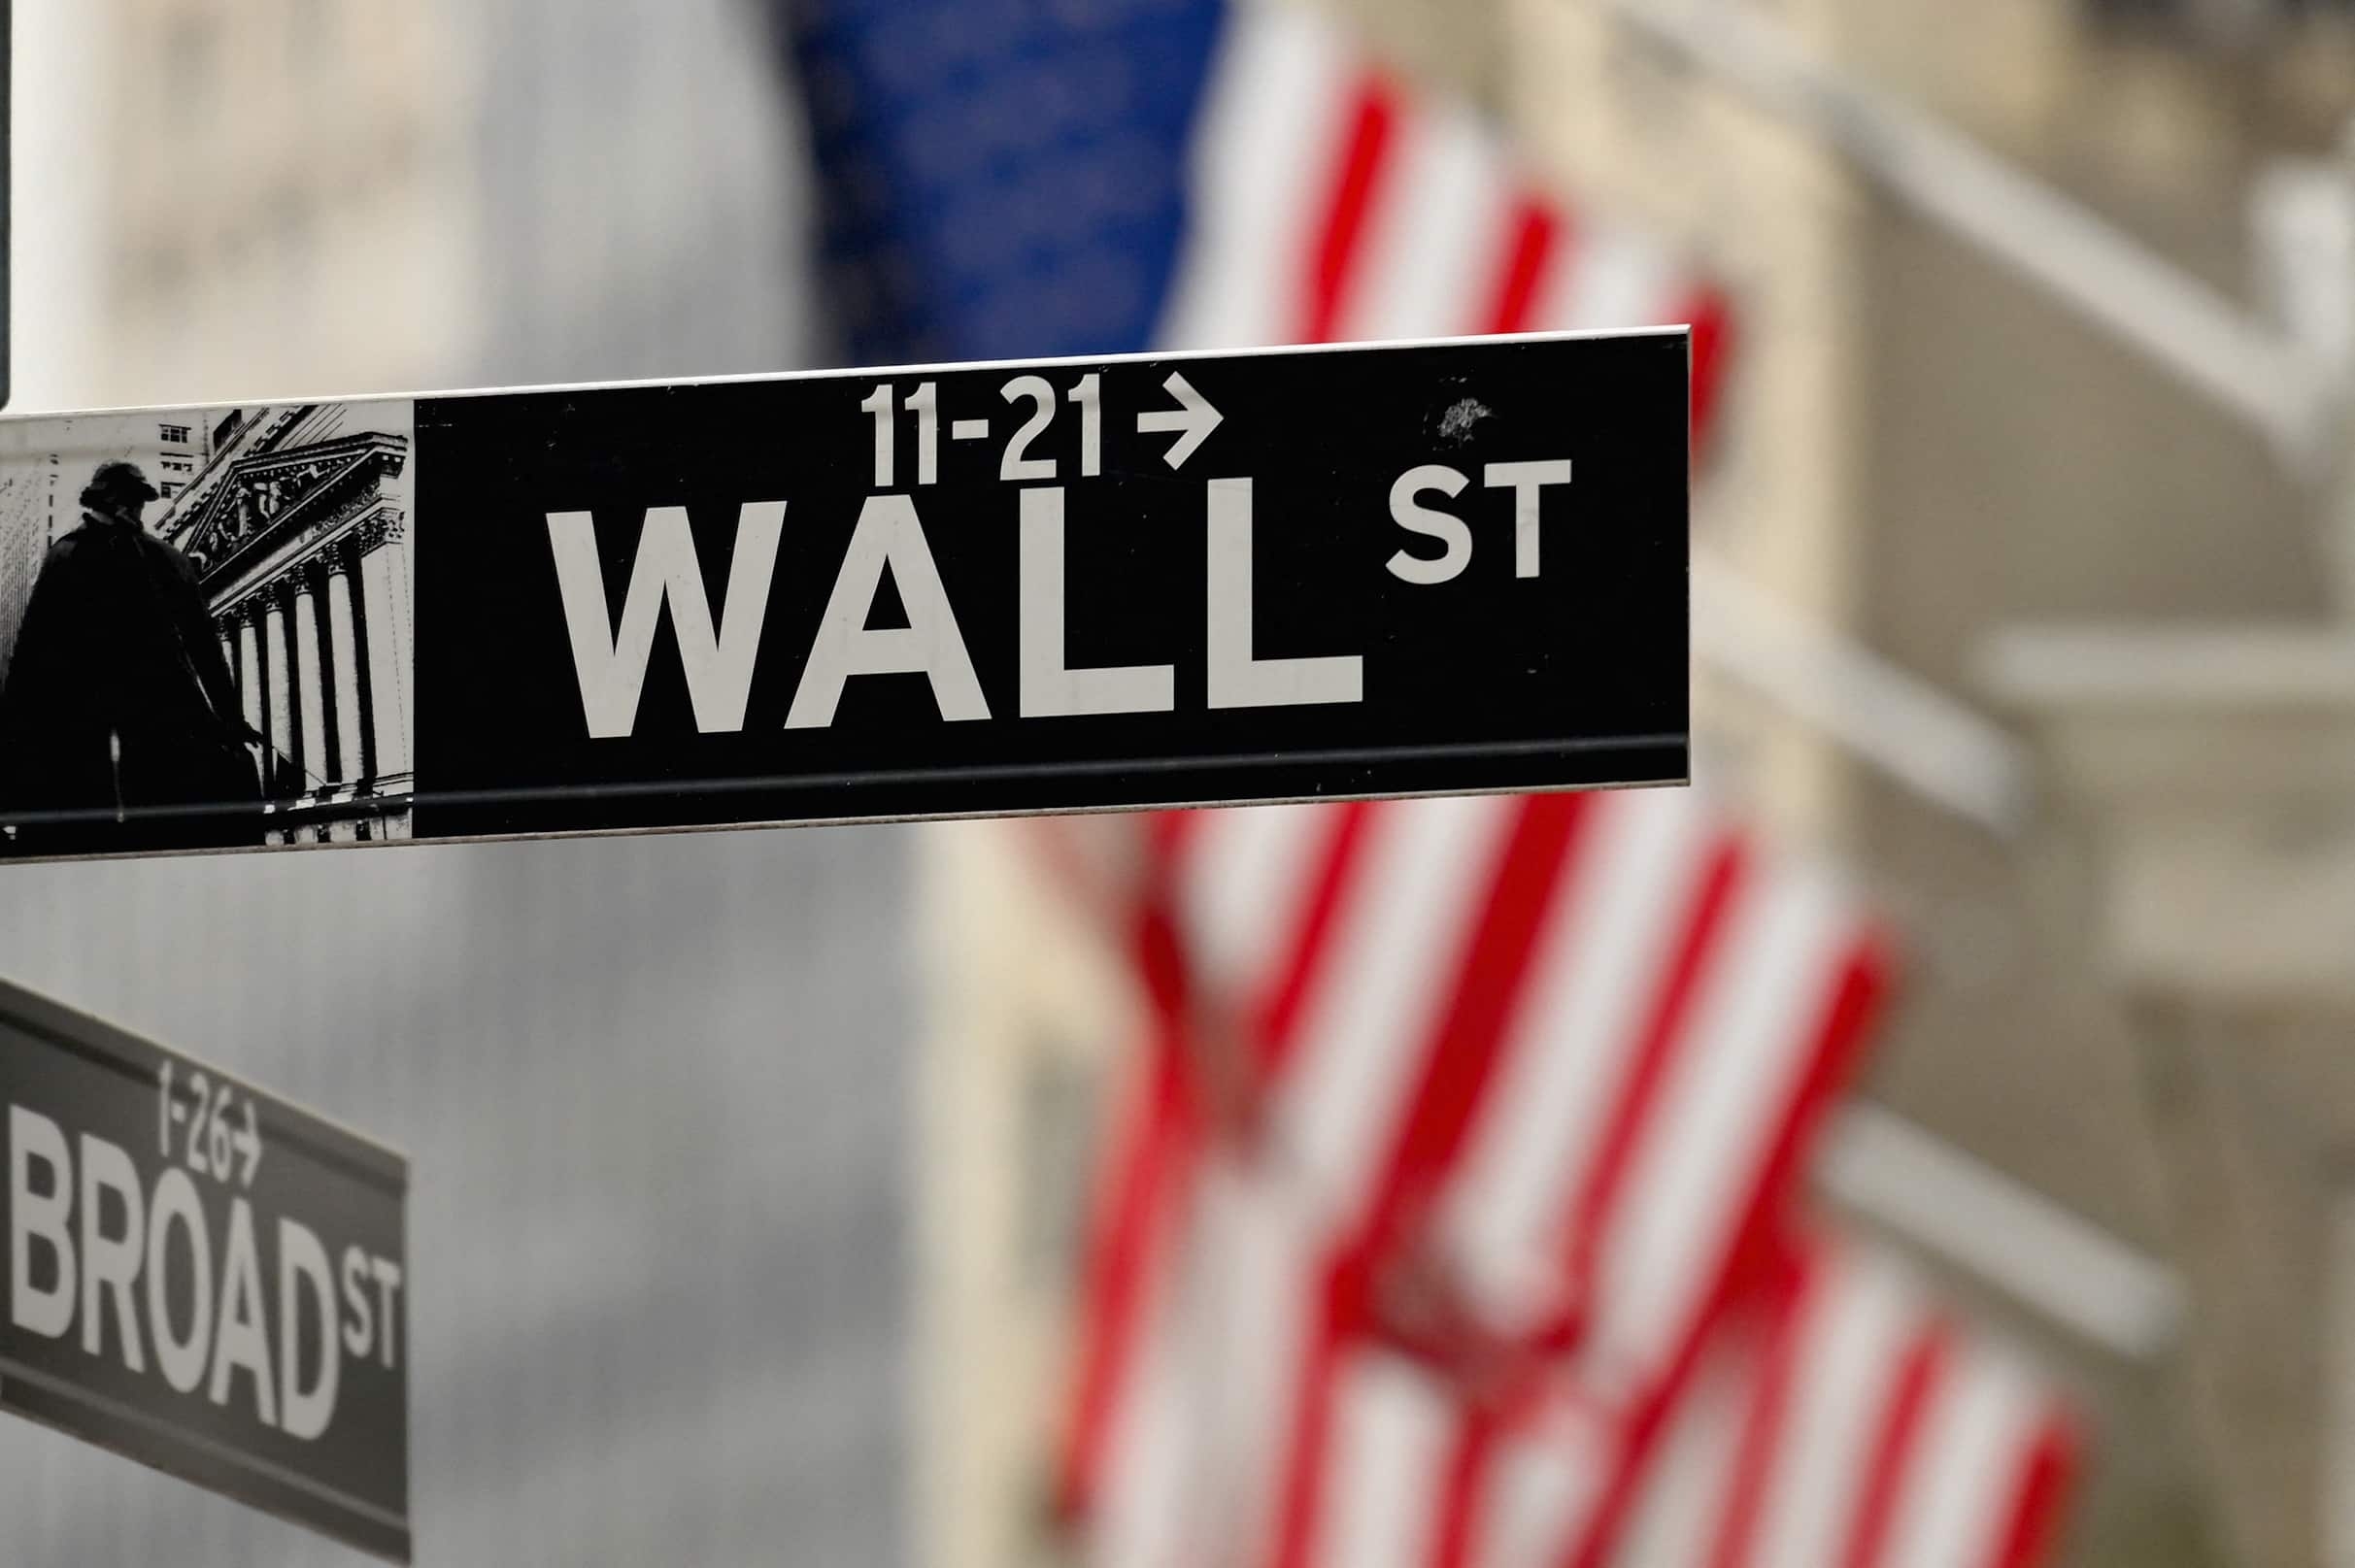 All three main Wall Street benchmarks erased gains made during a relief rally on May 4, with the Nasdaq posting its biggest one-day percentage decline since June 2020 and its lowest finish since November 2020. The Dow's decline was its worst daily performance since October 2020. The Dow Jones Industrial Average fell 1,063.09 points, or 3.12 percent, to 32,997.97, the S&amp;P 500 lost 153.3 points, or 3.56 percent, to 4,146.87 and the Nasdaq Composite dropped 647.17 points, or 4.99 percent, to 12,317.69.